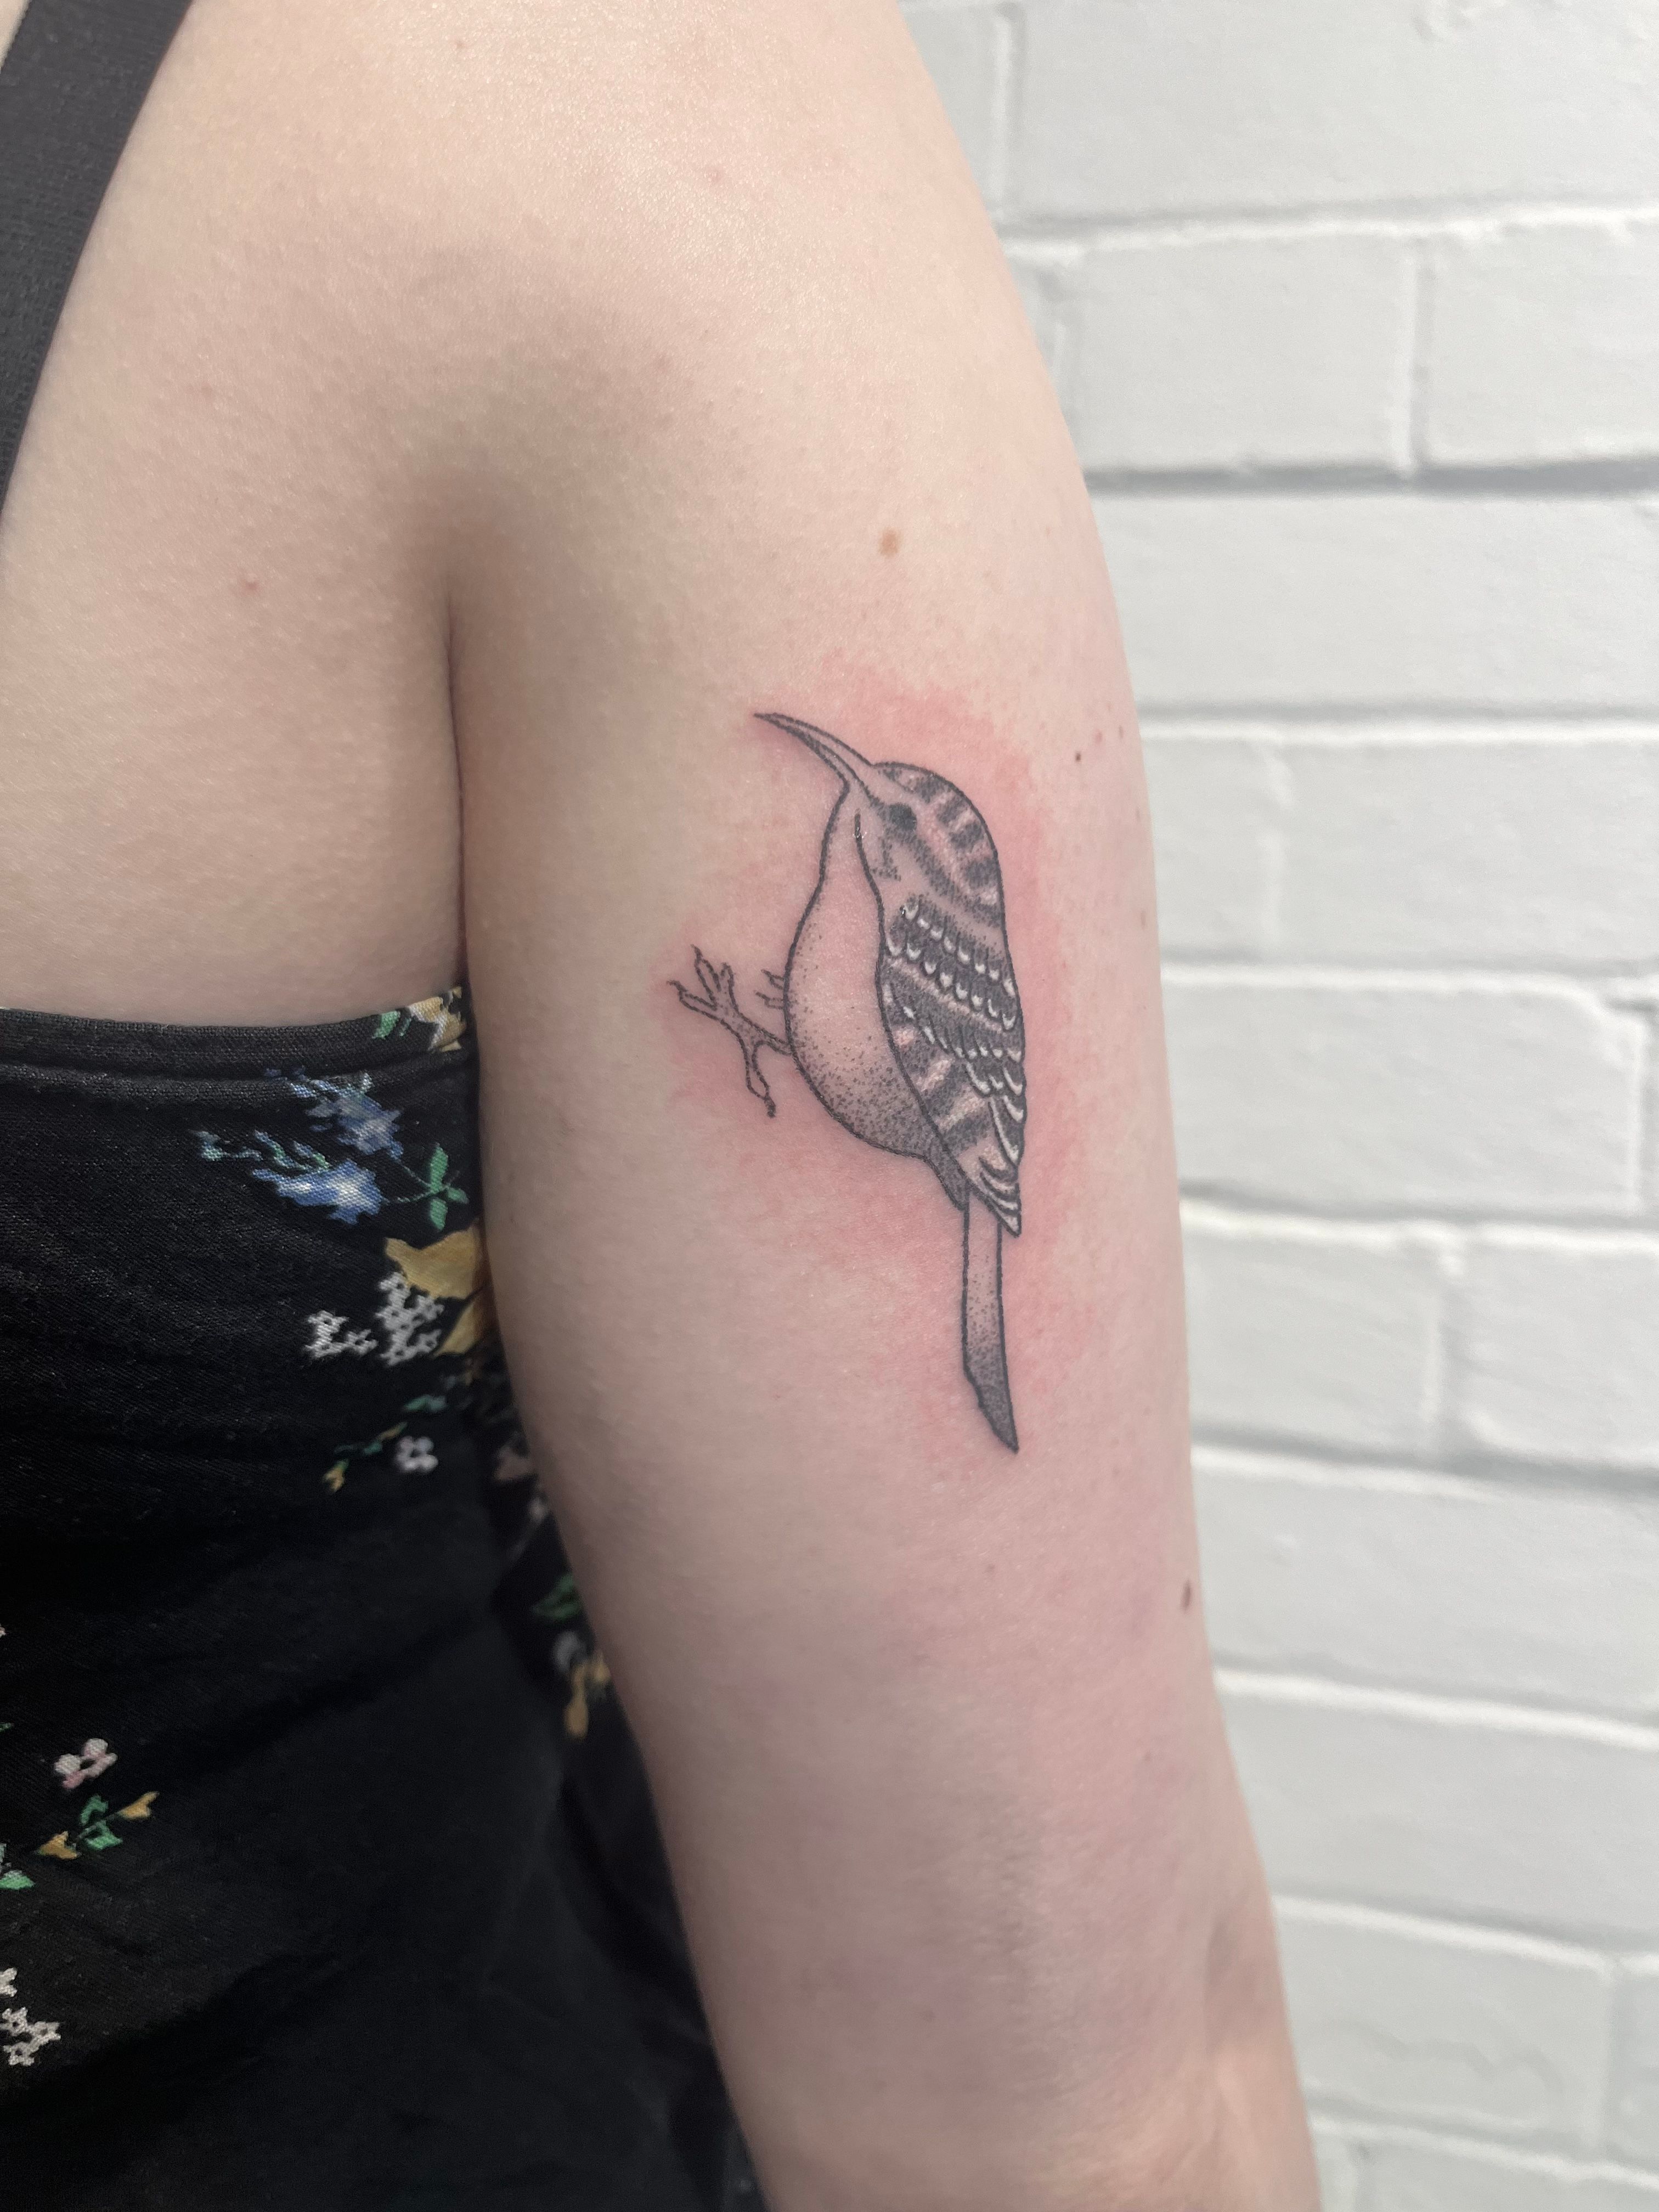 Best Small Tattoo Placement Ideas for Female | Bird tattoo ... | Tattoos  for daughters, Bird tattoos for women, Tiny bird tattoos